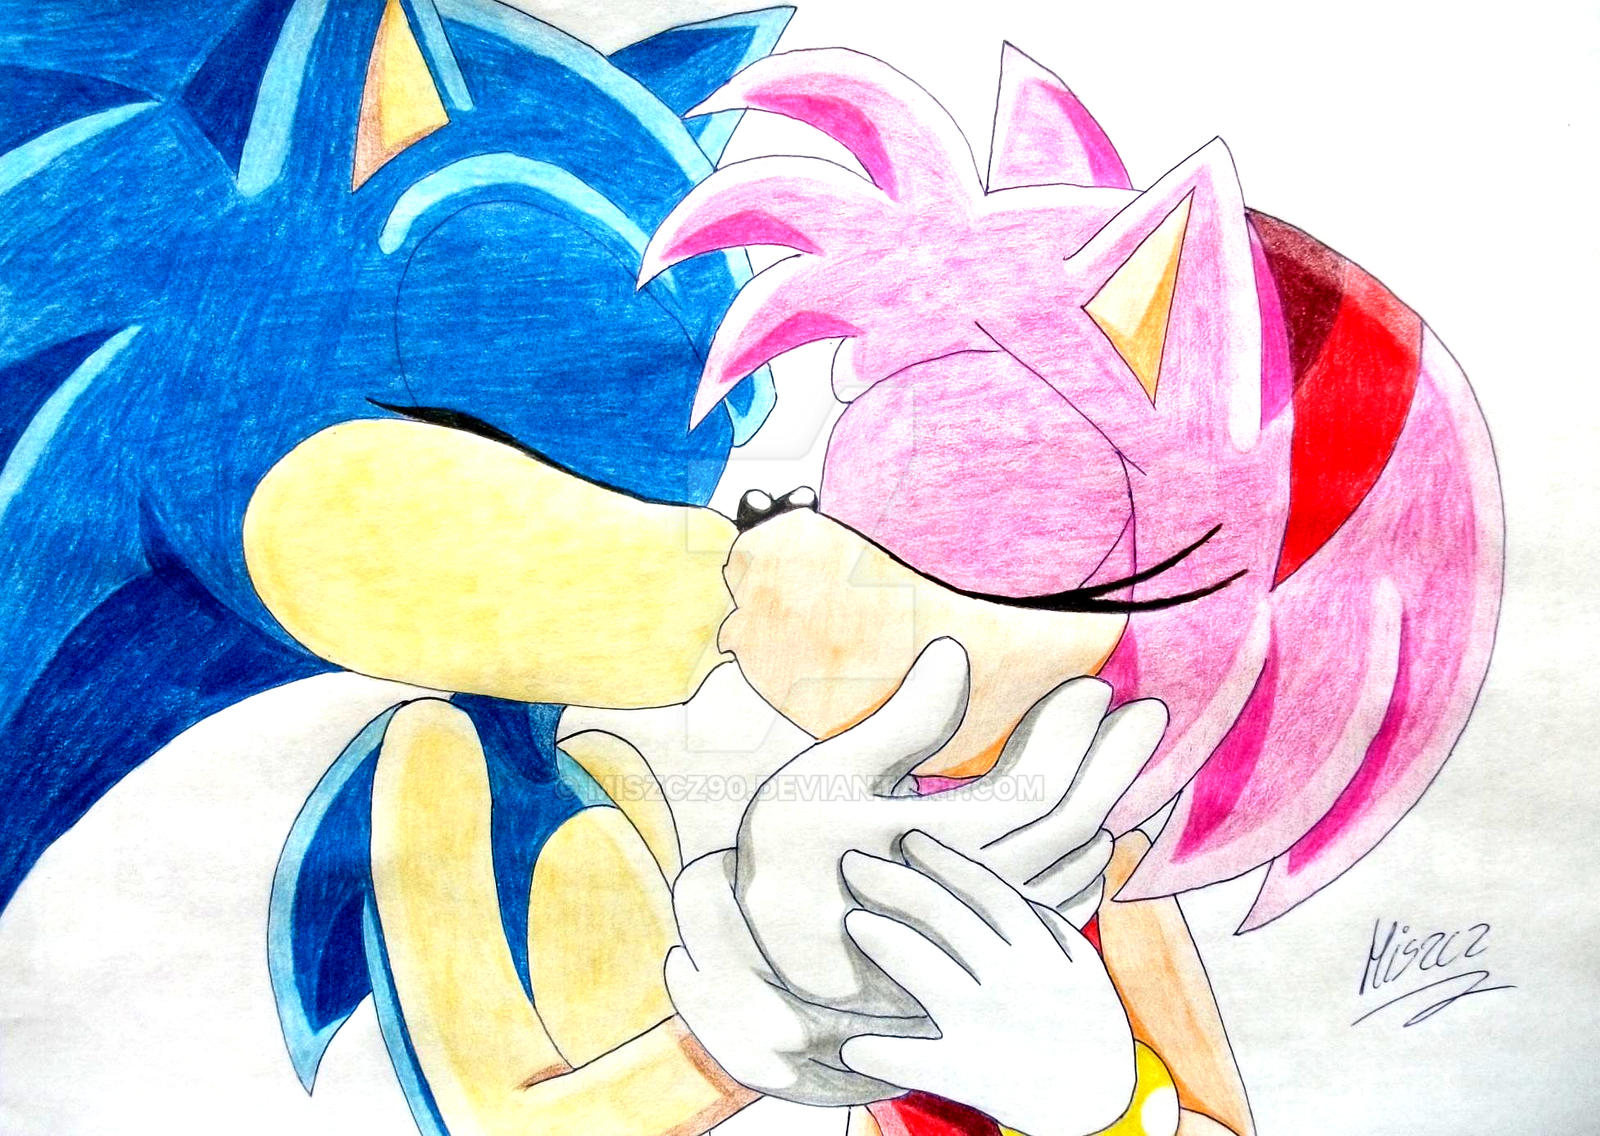 Sonic And Amy Kiss By Miszcz90 On DeviantArt.